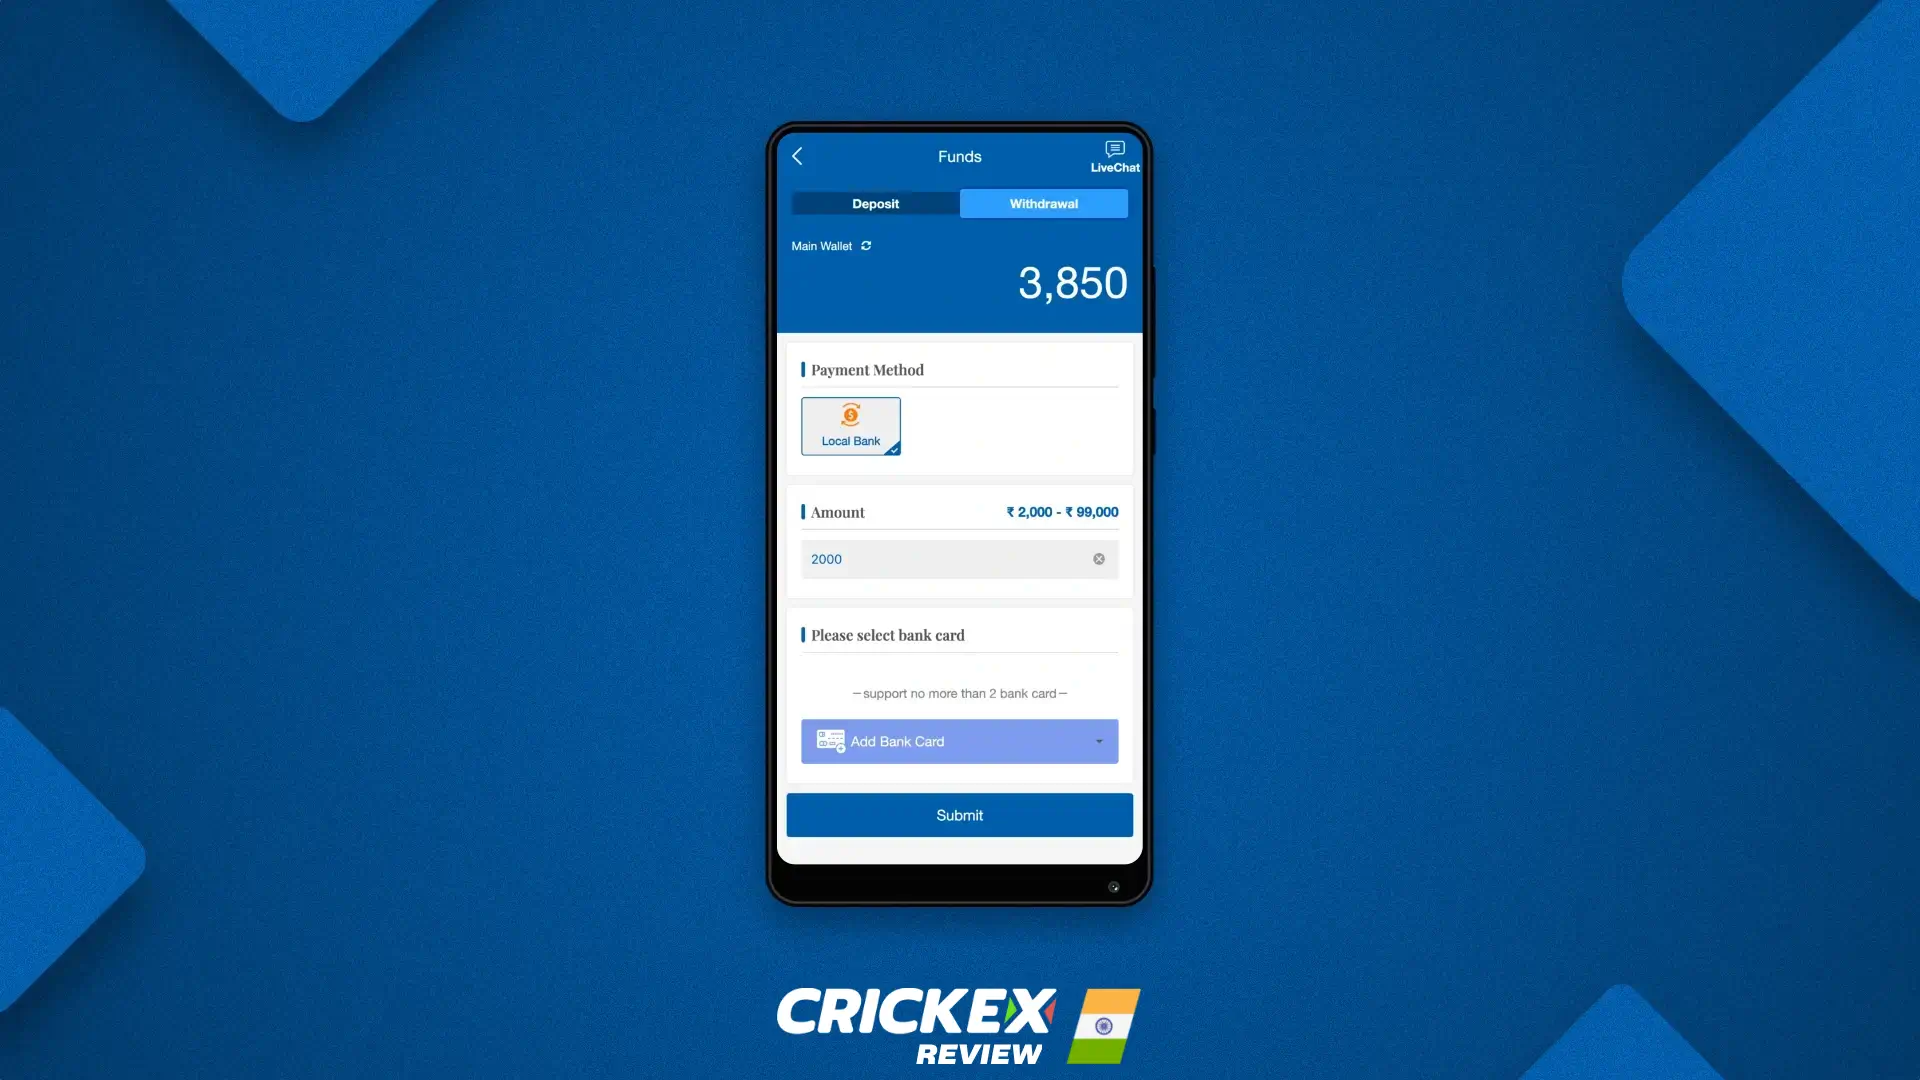 Withdrawal Options at Crickex in India